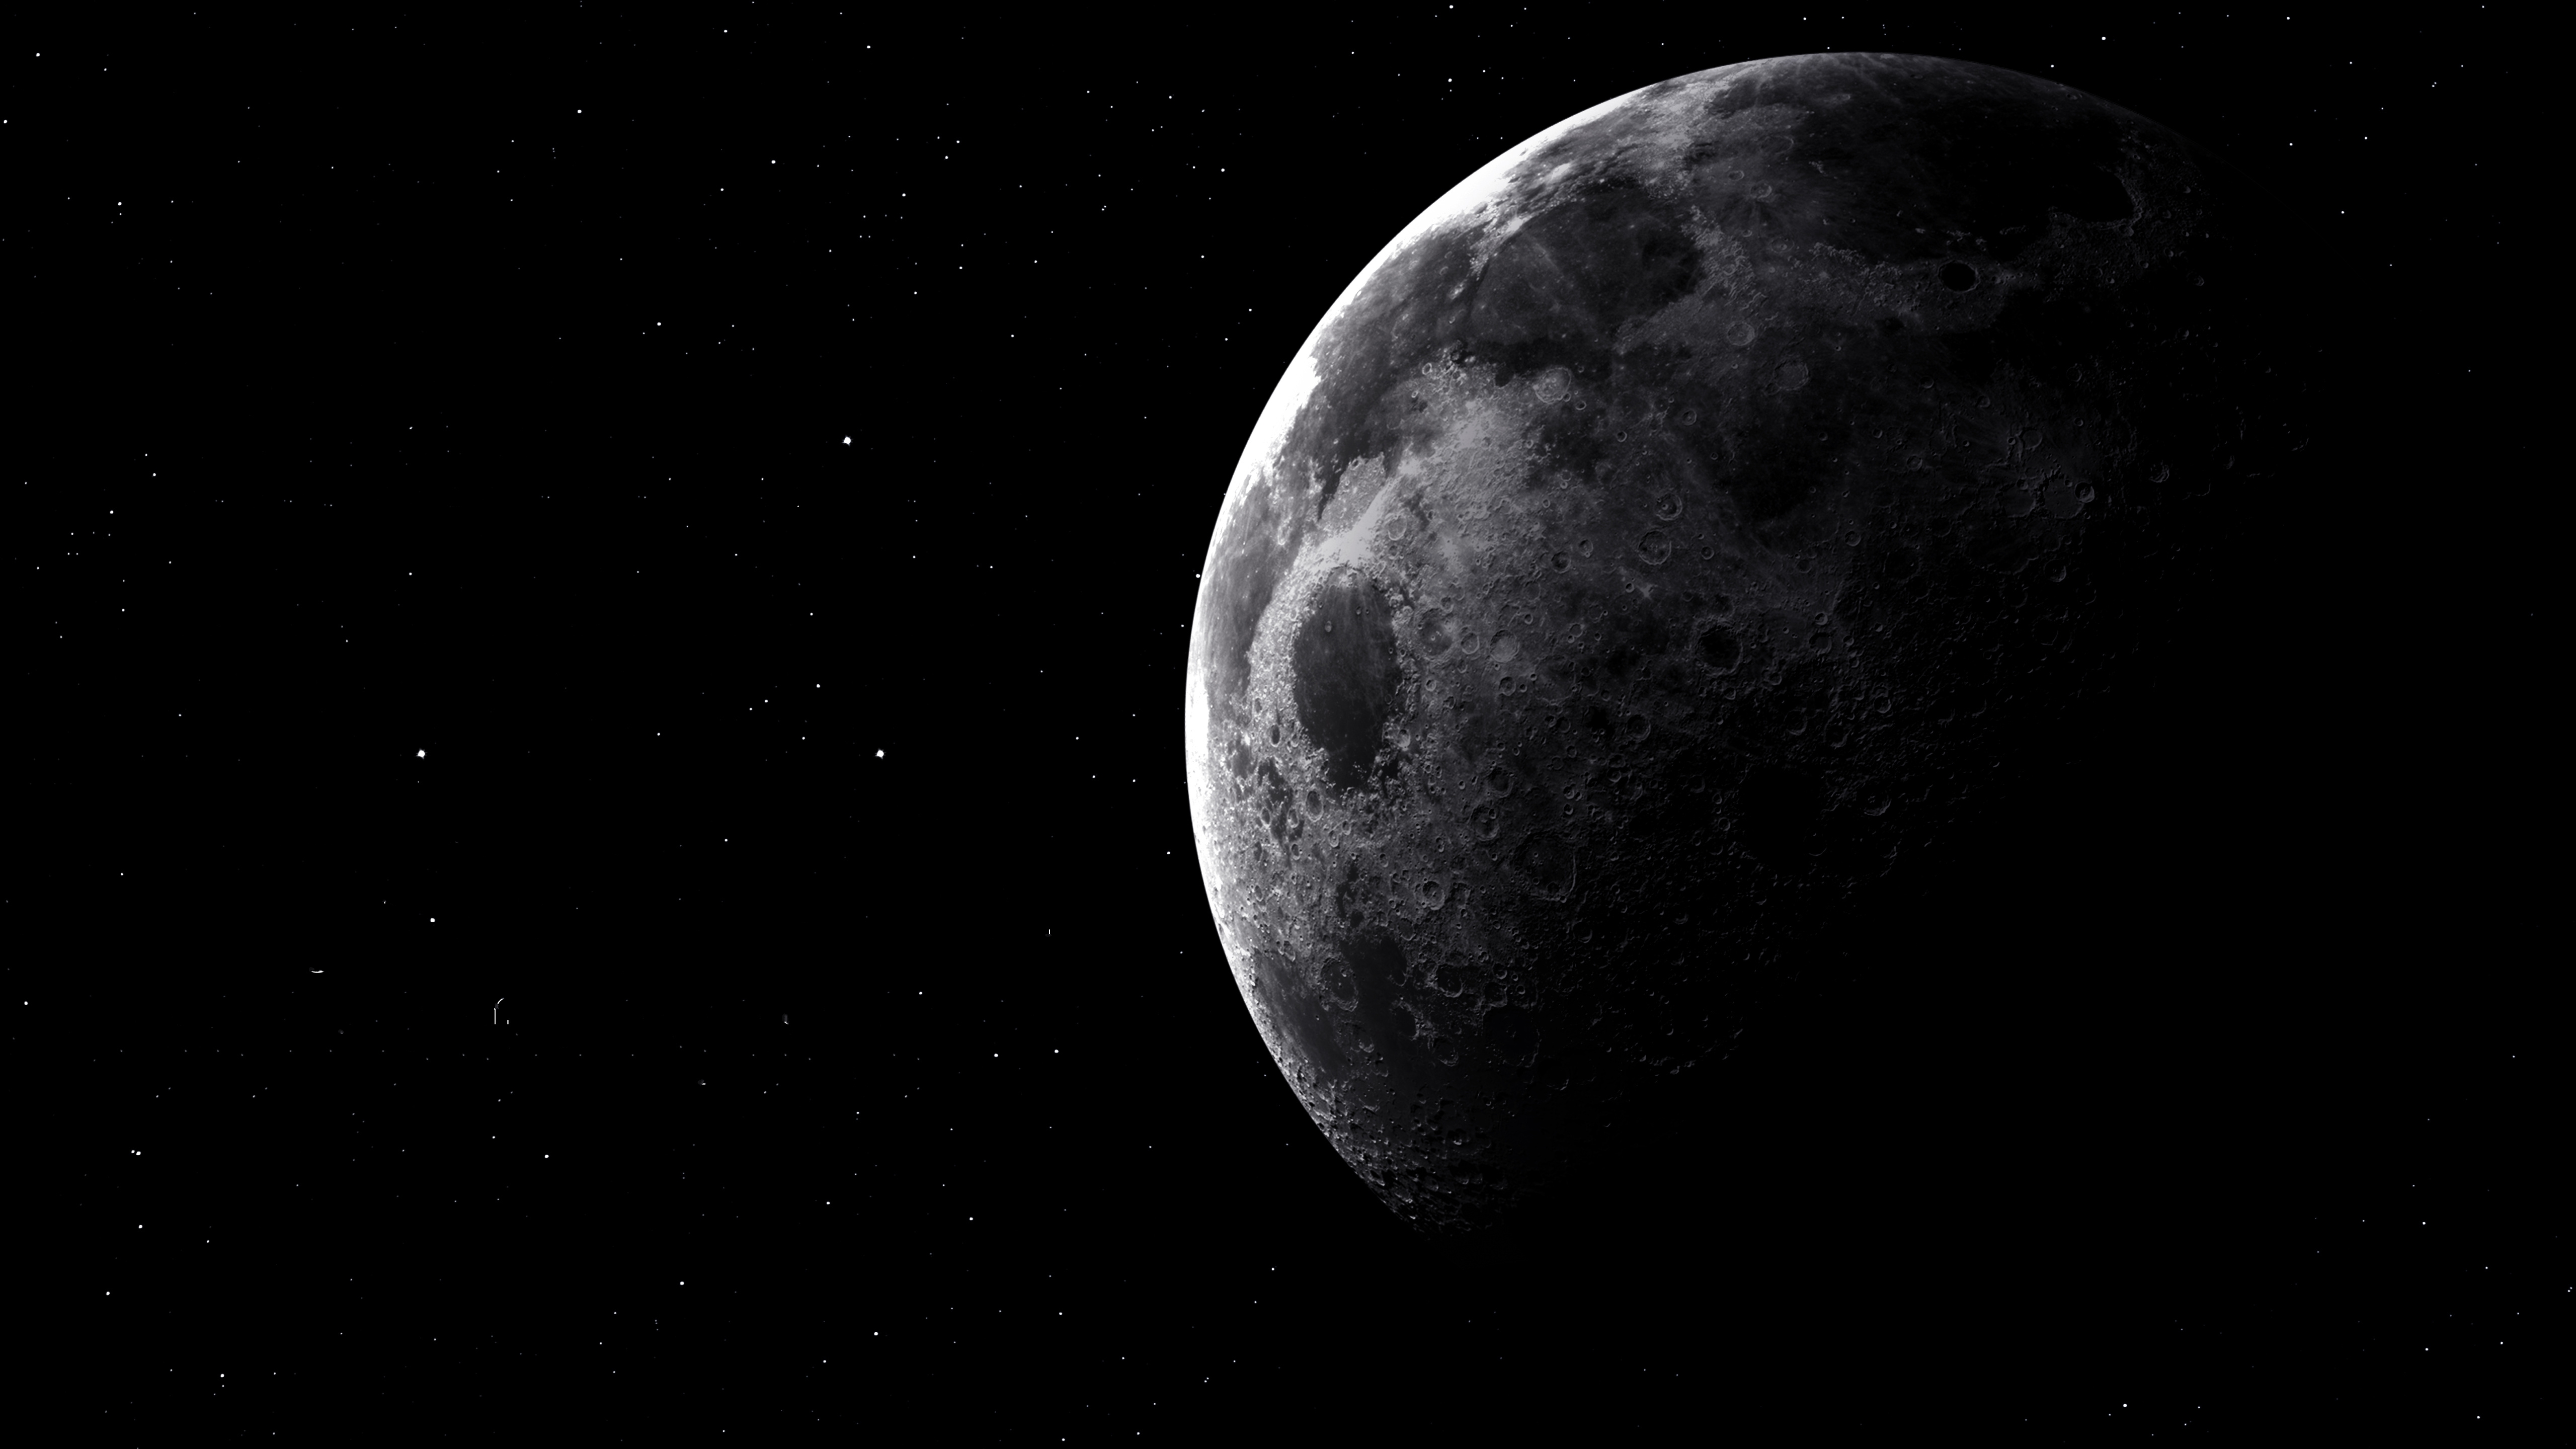 Moon 4k uhd 16:9 wallpapers hd, desktop backgrounds 3840x2160, images and  pictures